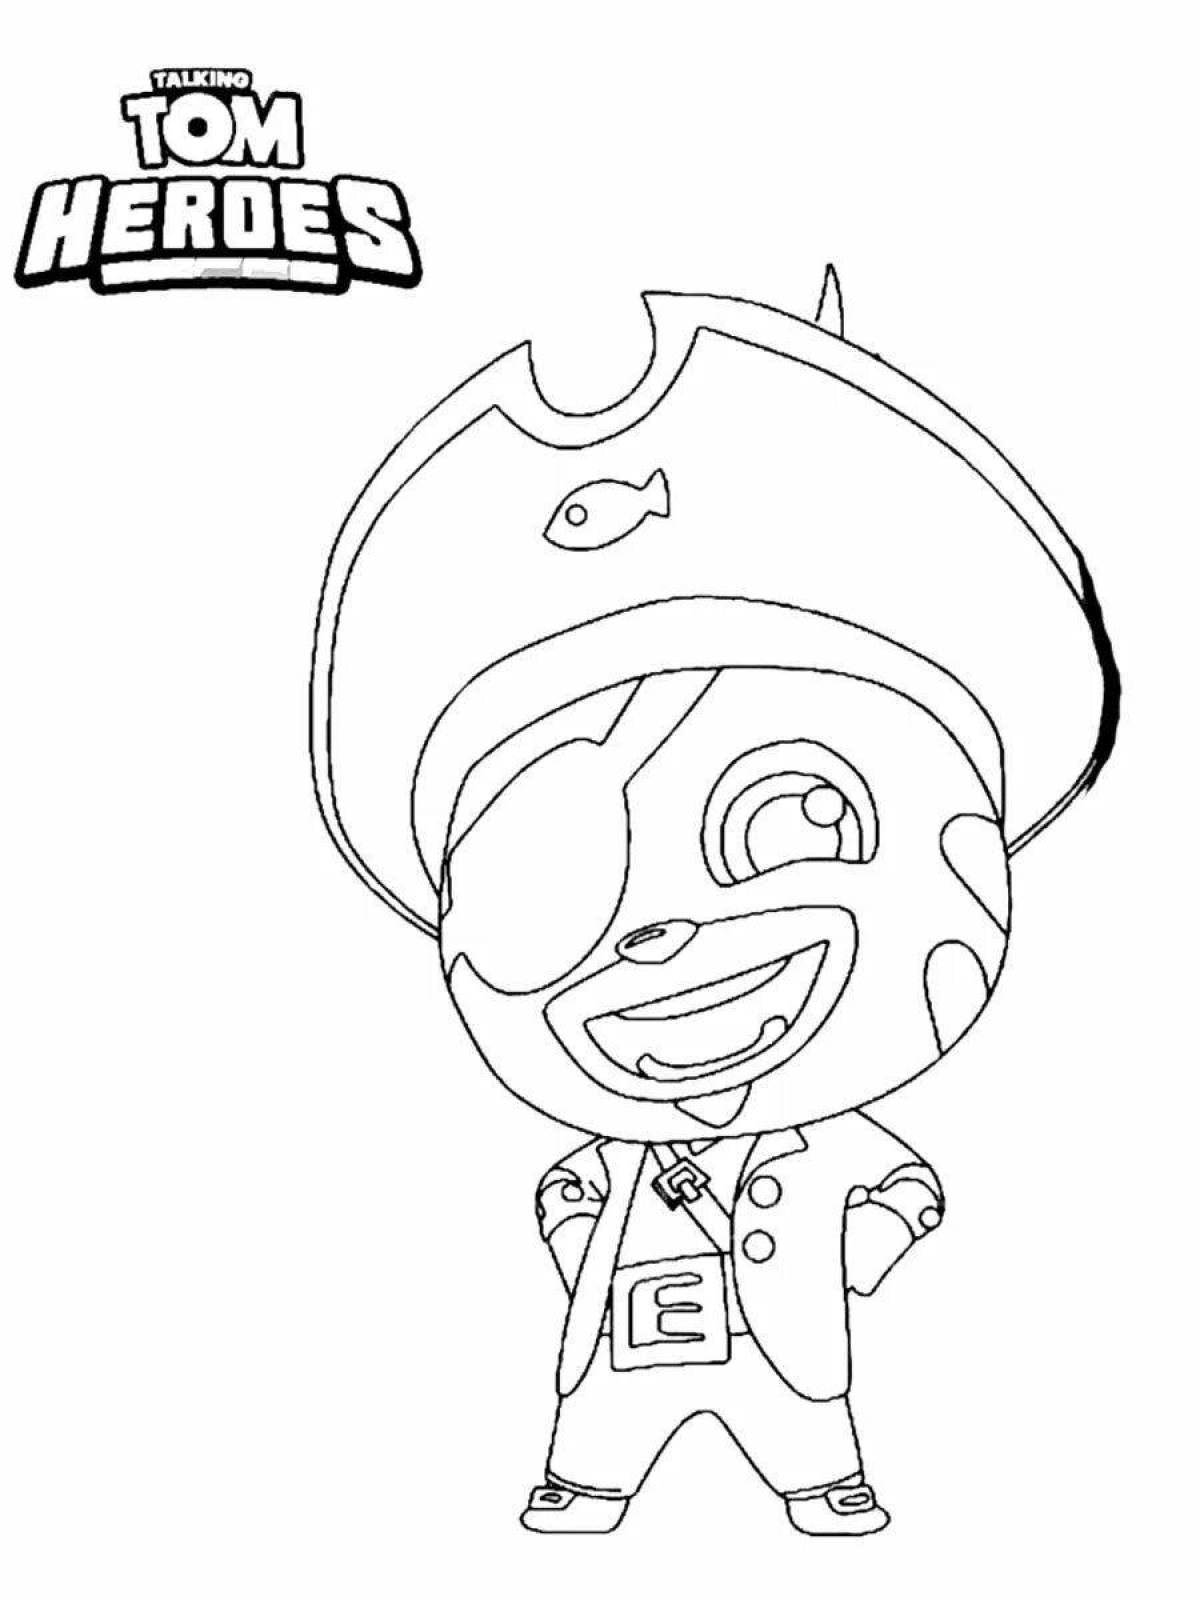 Coloring playful tom chase heroes